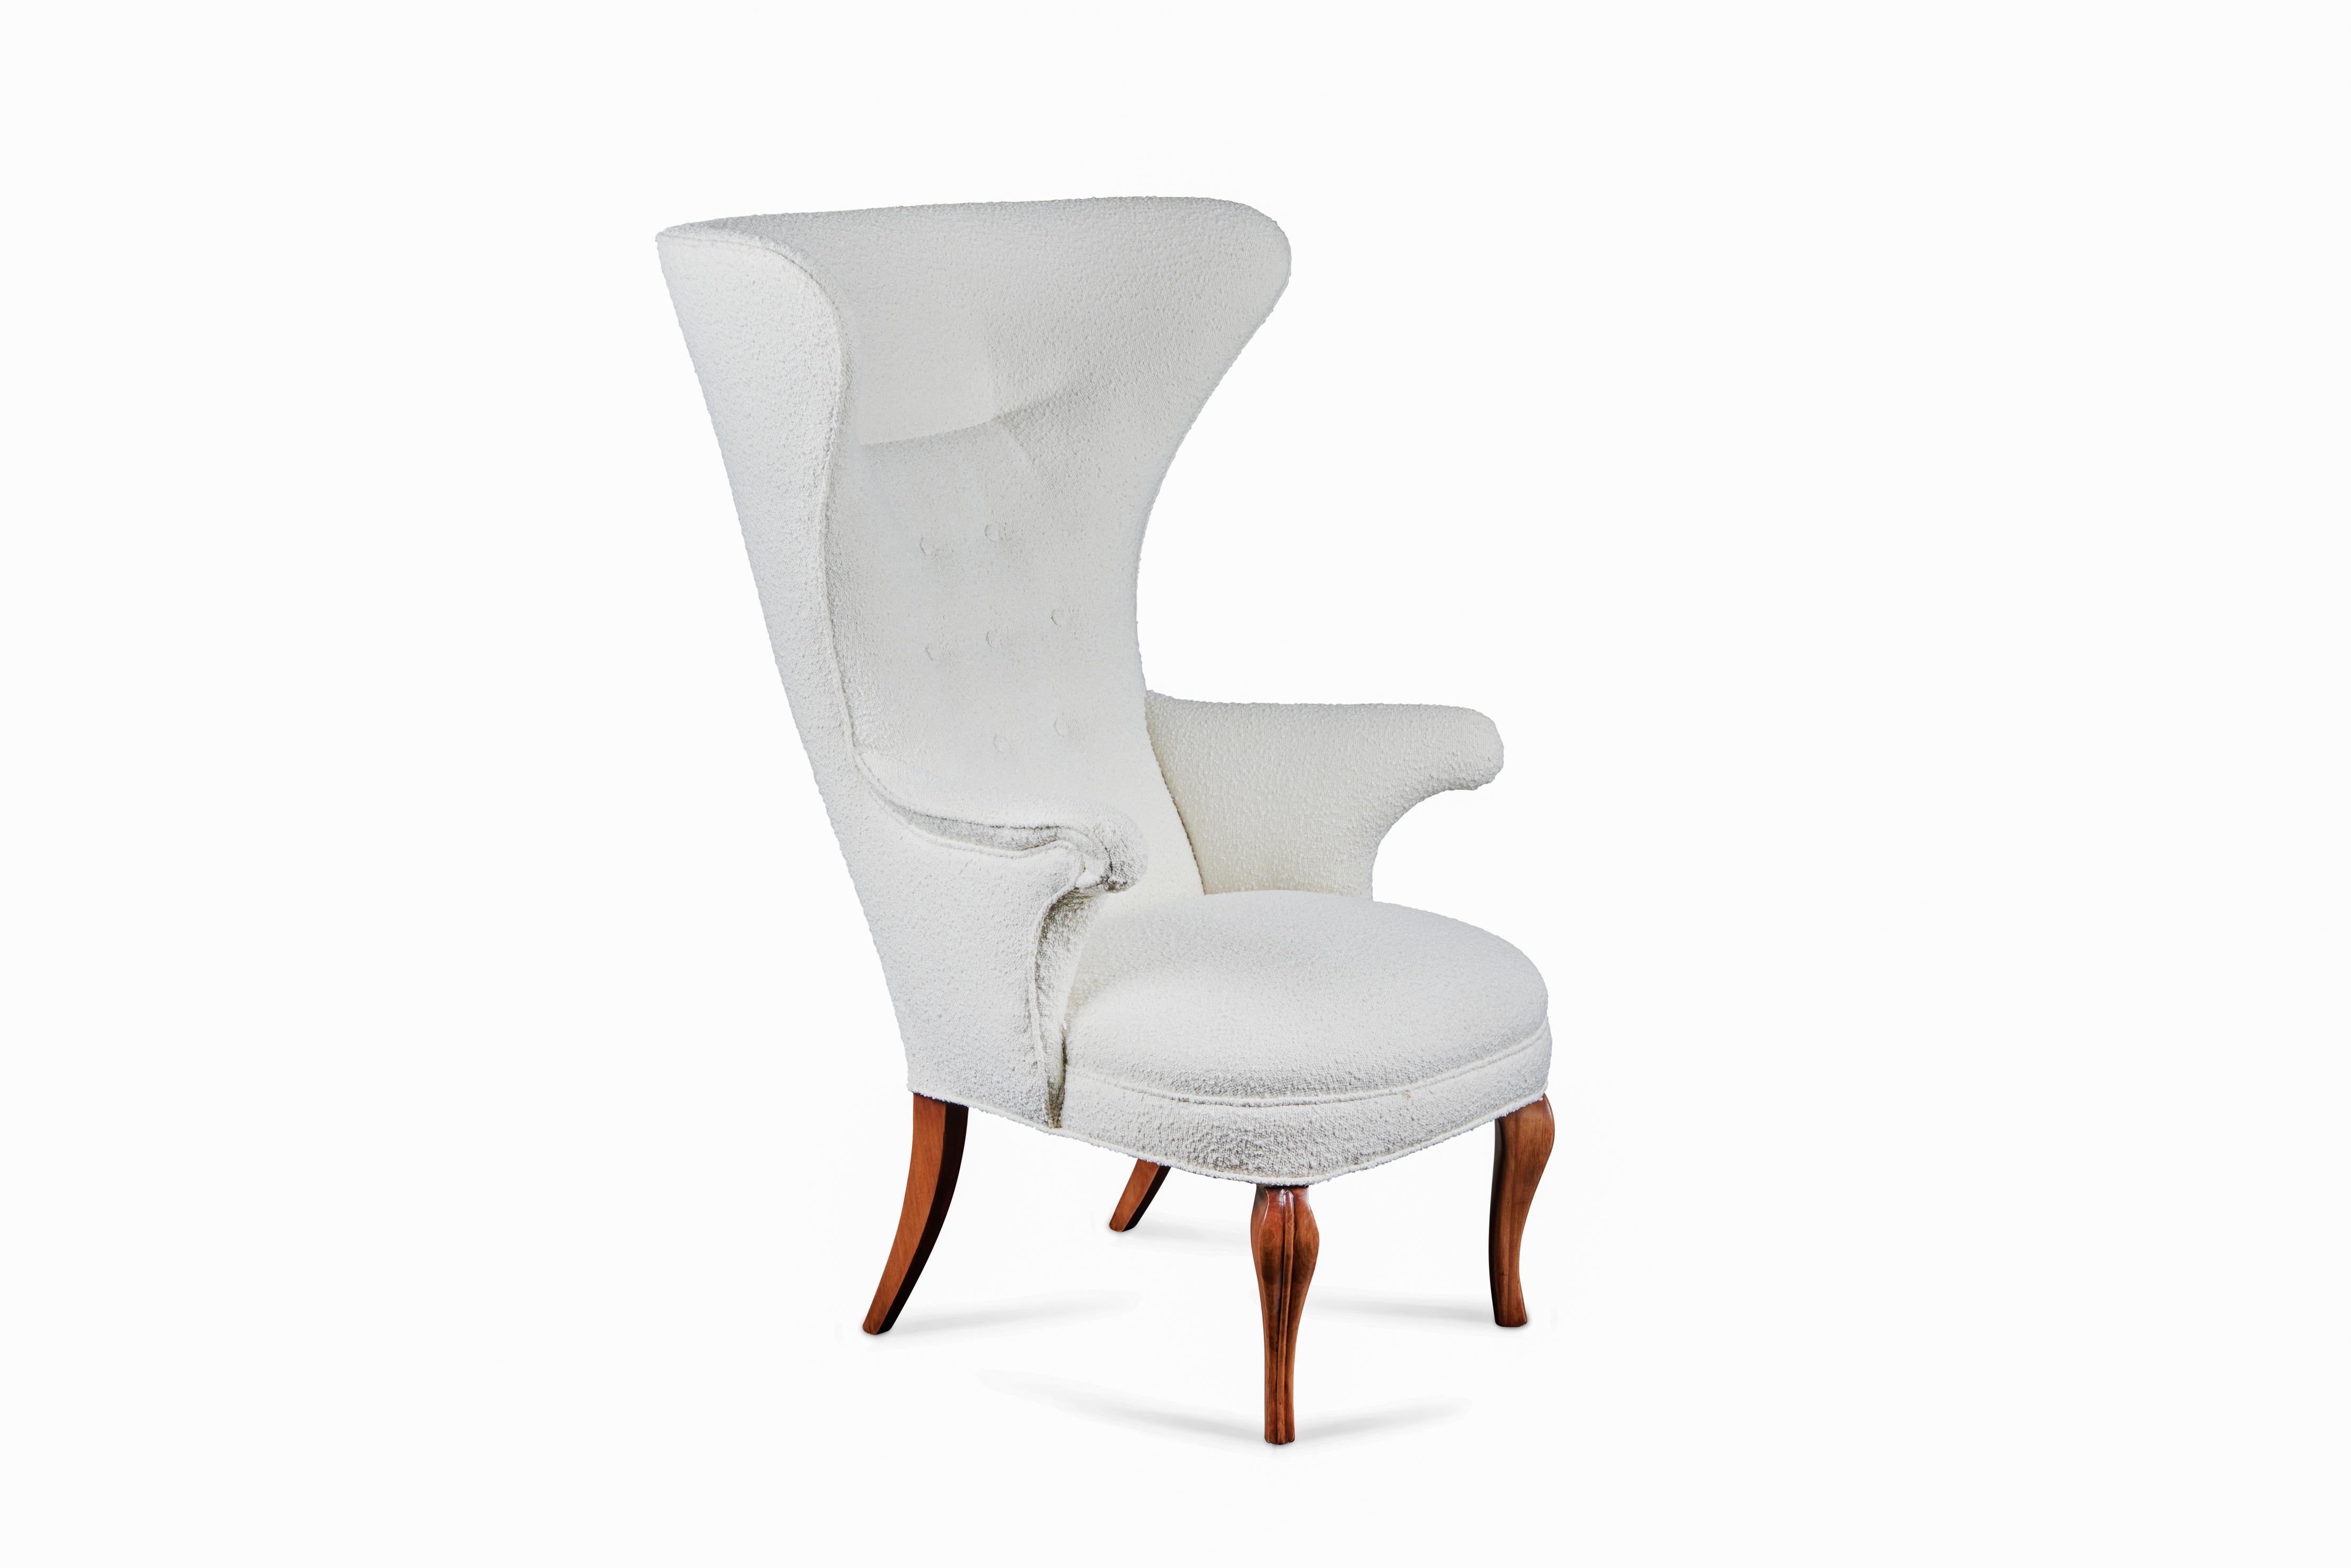 Late 20th Century Mid-Century Modern Sculptural Wing Chair For Sale